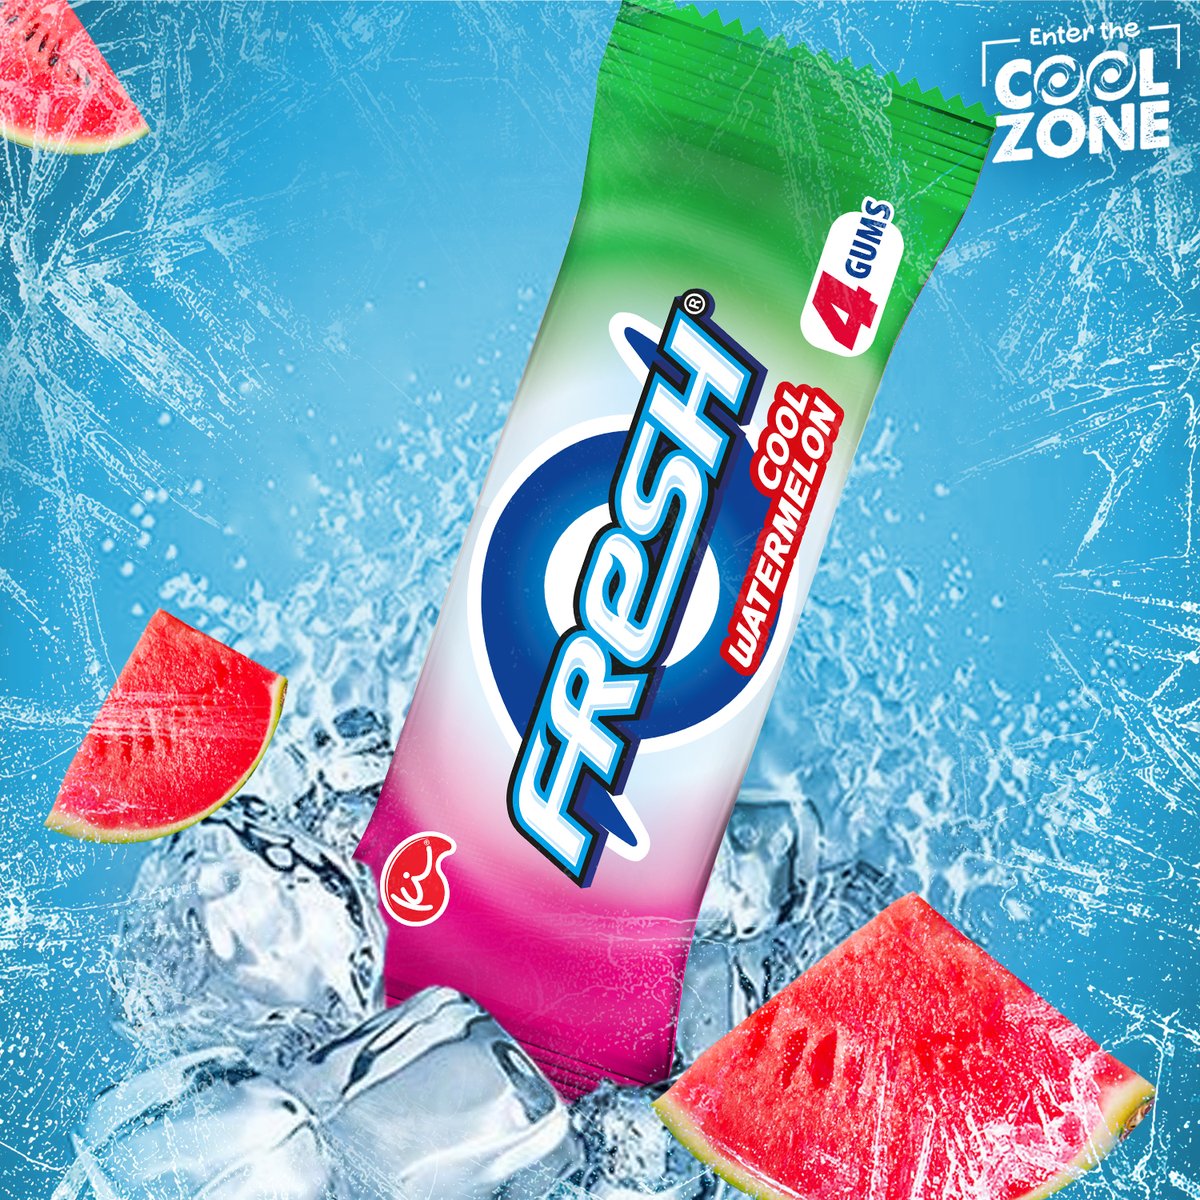 Whoa, look at the time: it’Gum O’Clock! Make your Friday mouthwatering with Fresh Watermelon. #EnterTheCoolZone #FreshChewingGum